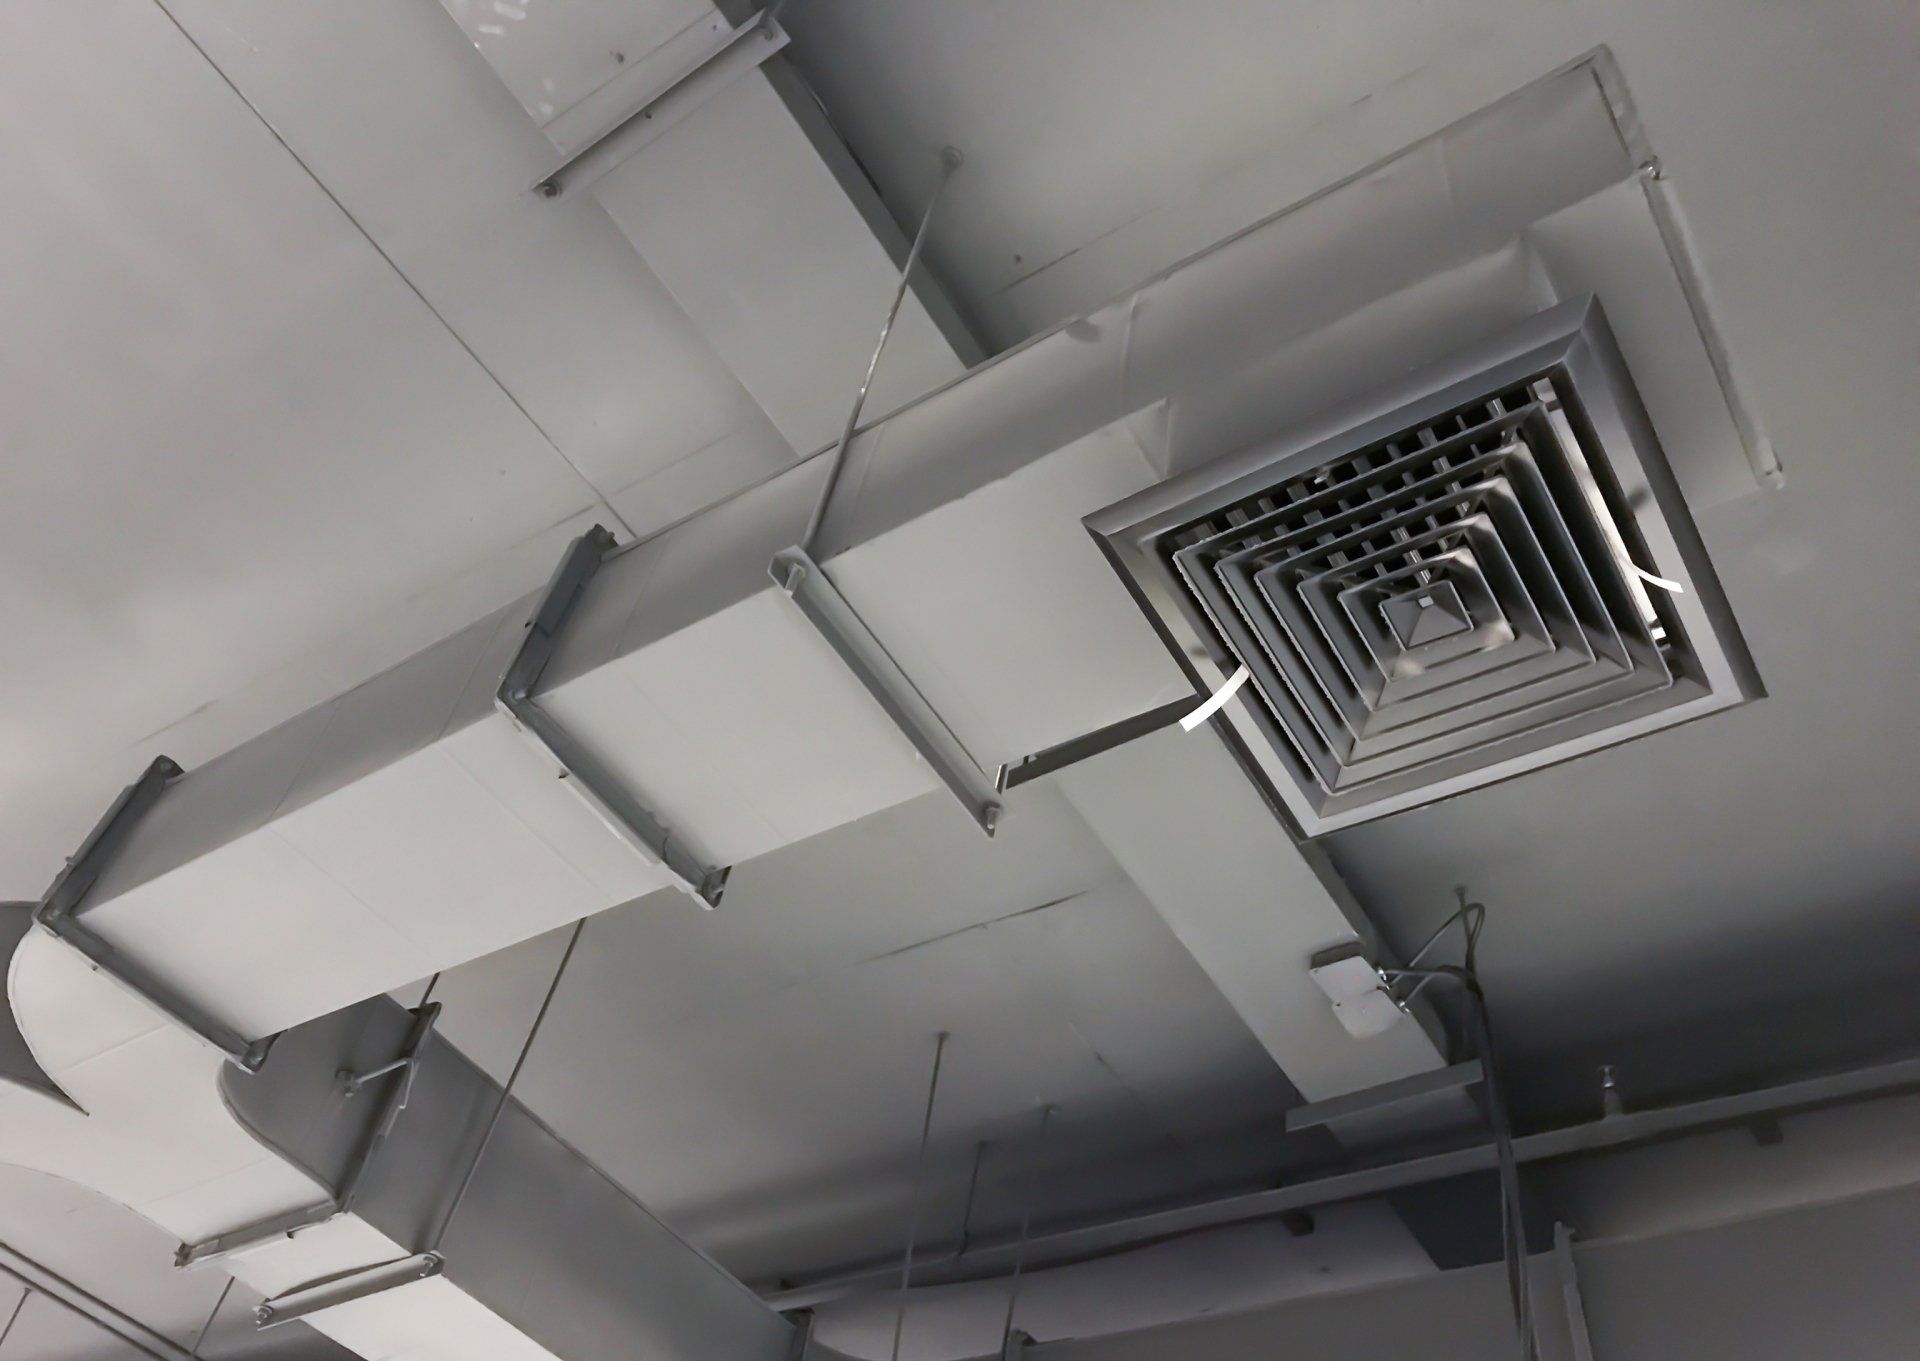 Building Interior Air Duct - Air Conditioning Services in Mackay, QLD